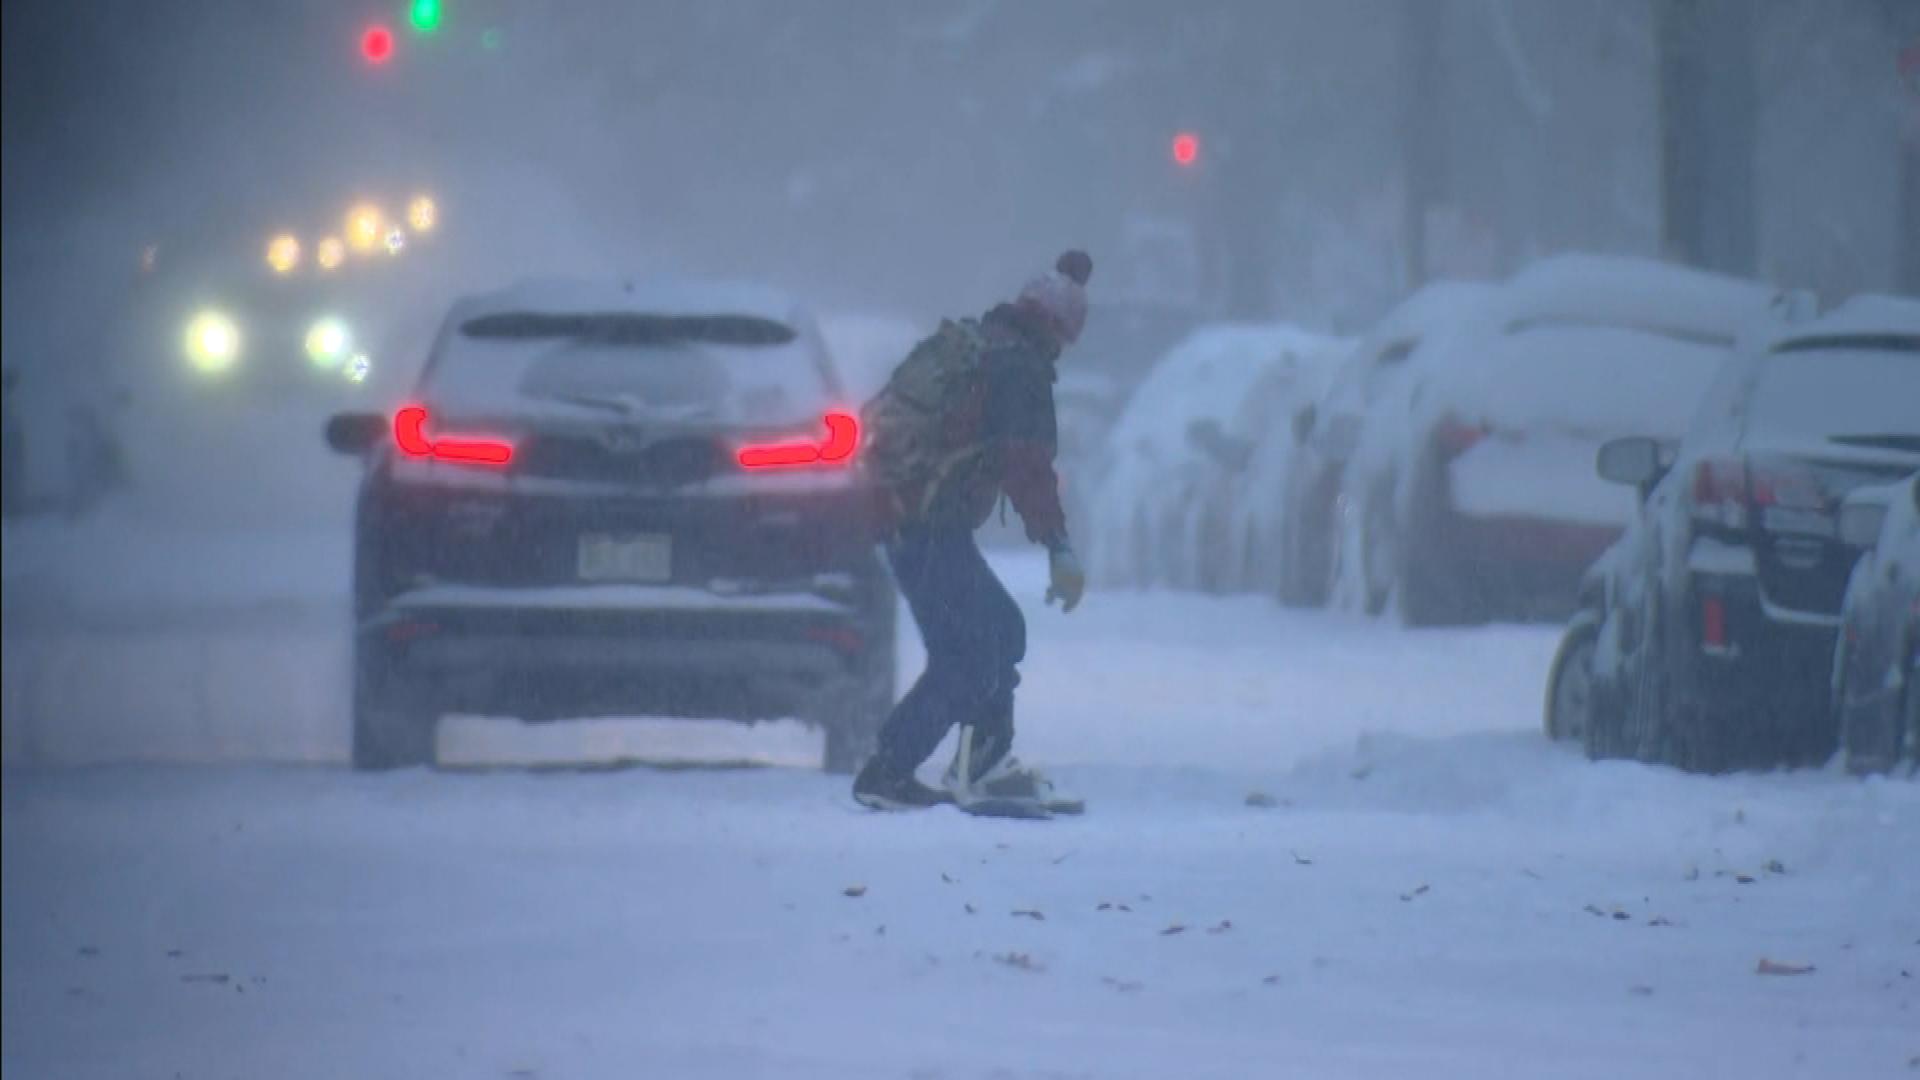 A person tries to ride a snowboard down the road in Denver Wednesday morning.